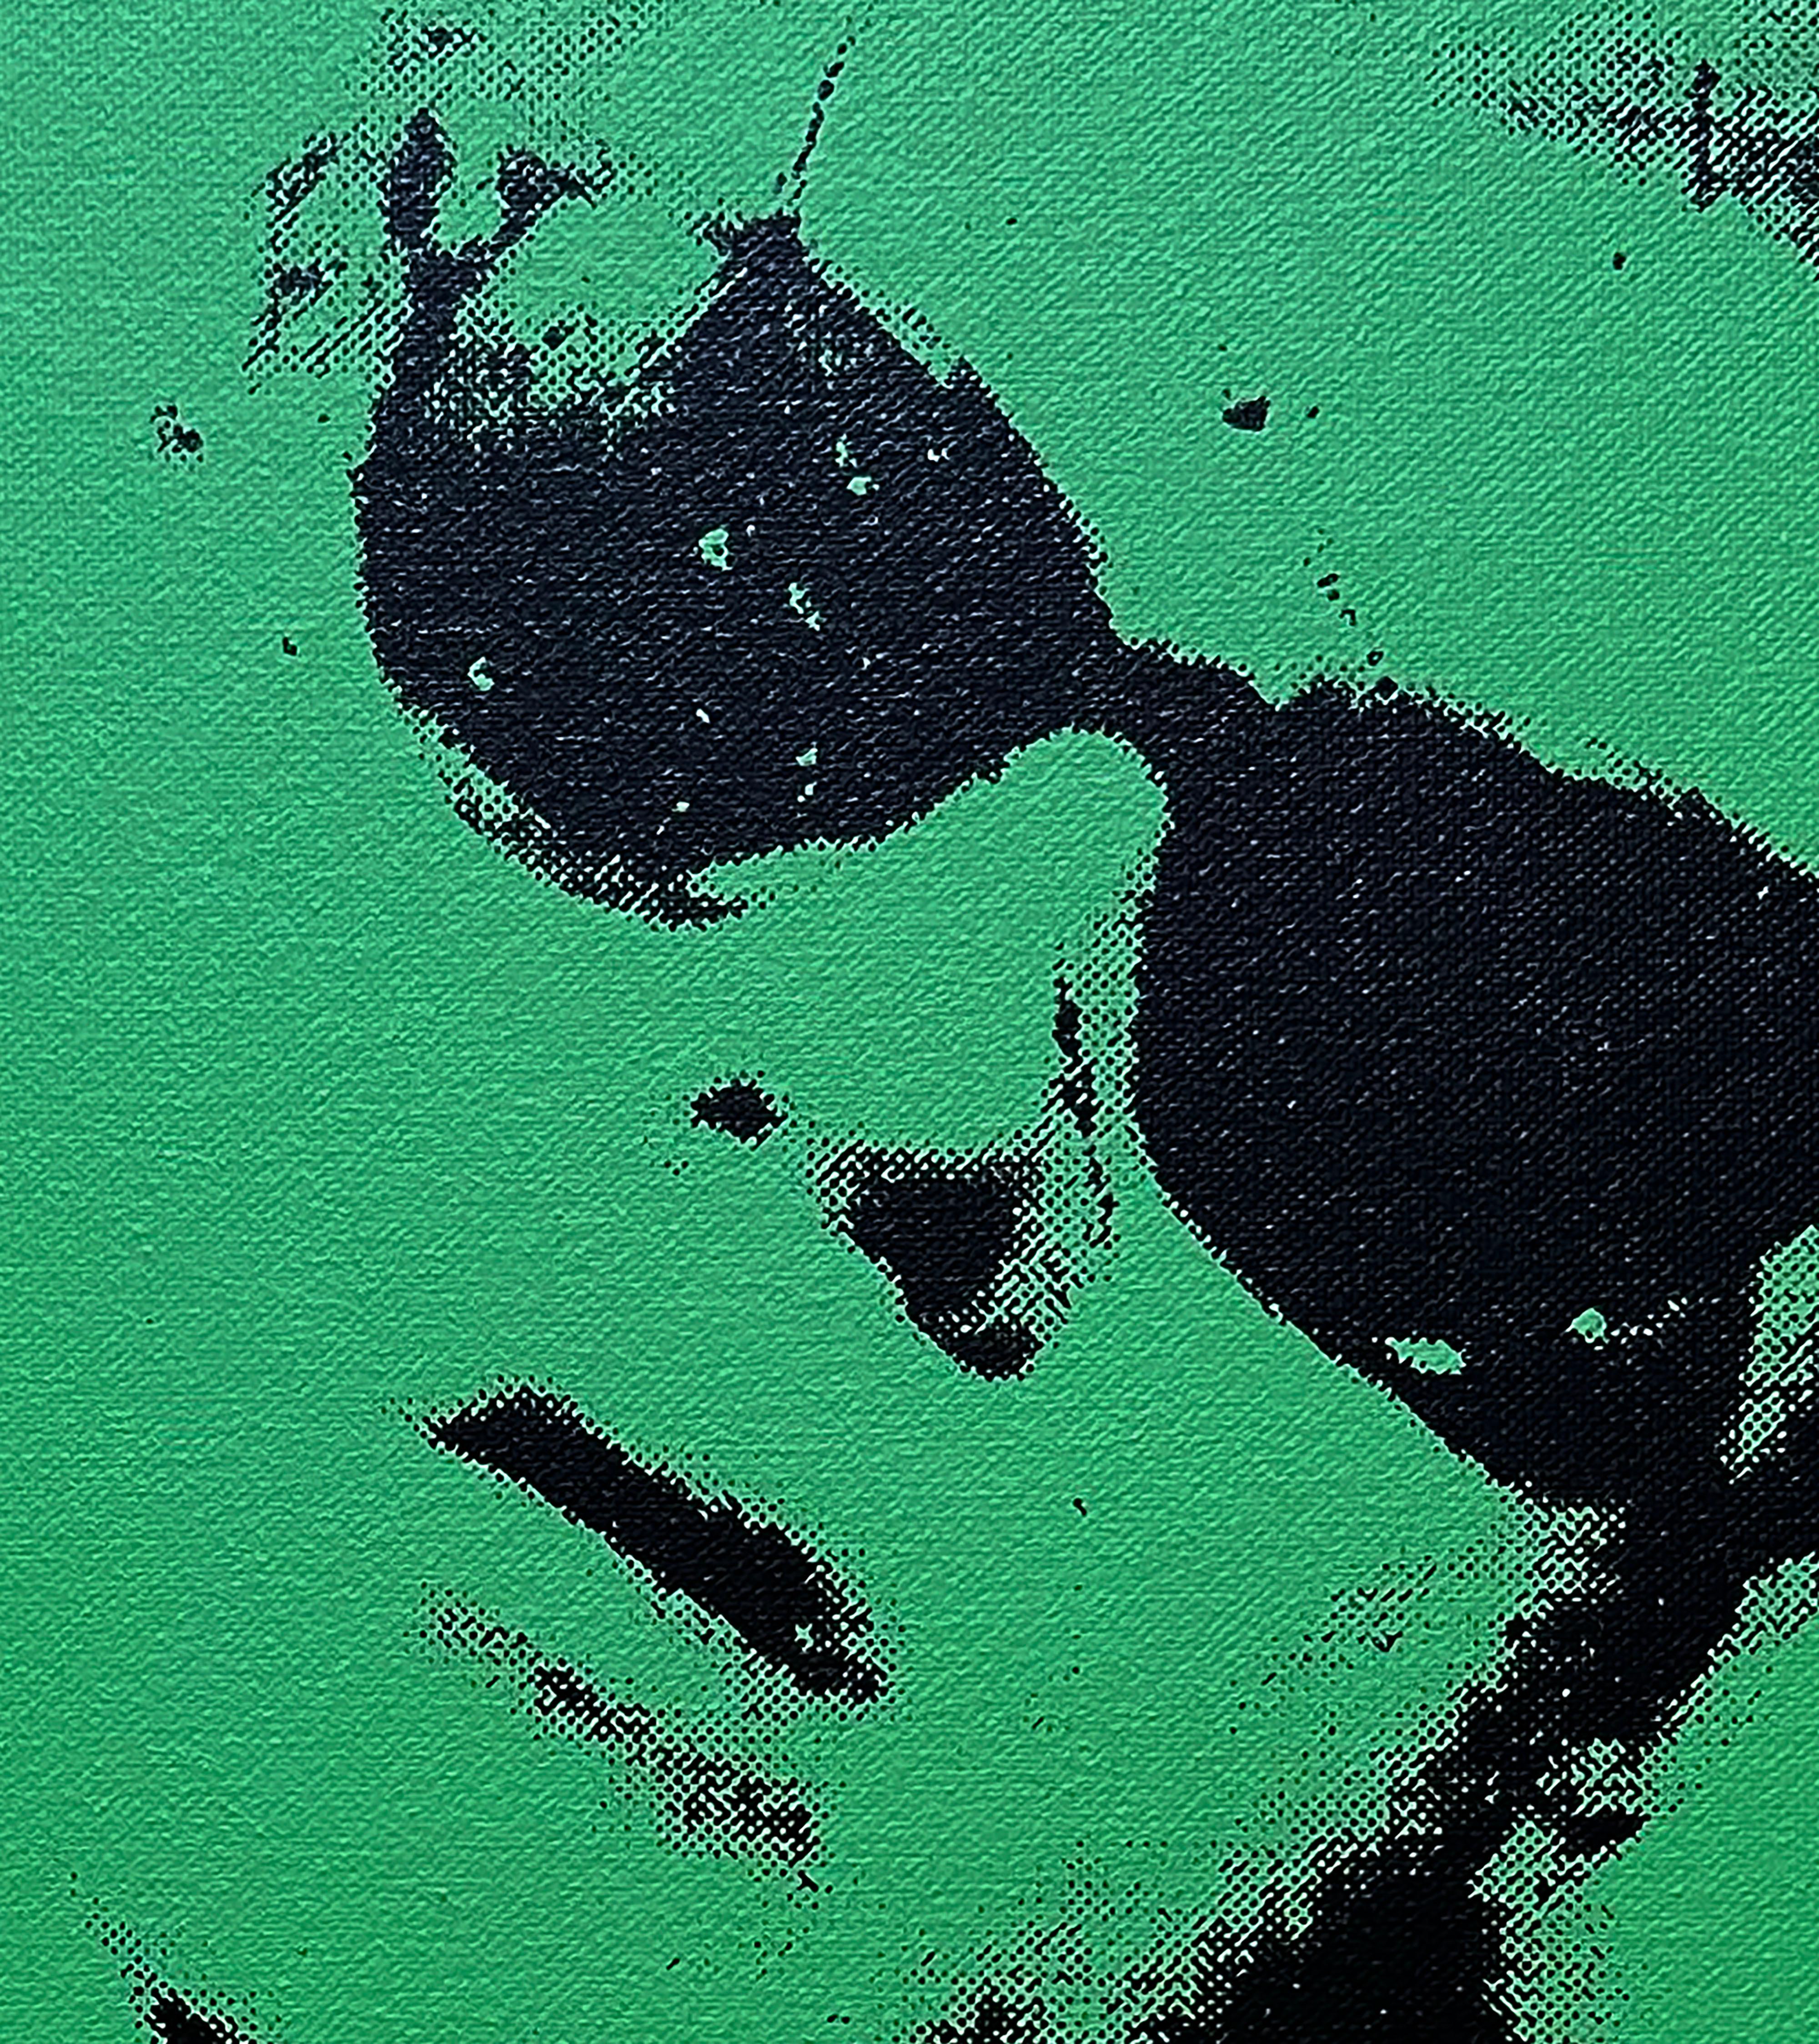 Denied Warhol Green Self Portrait Photo Booth Painting by Charles Lutz
Silkscreen and acrylic on linen with Denied stamp of the Andy Warhol Art Authentication Board.
20 x 16